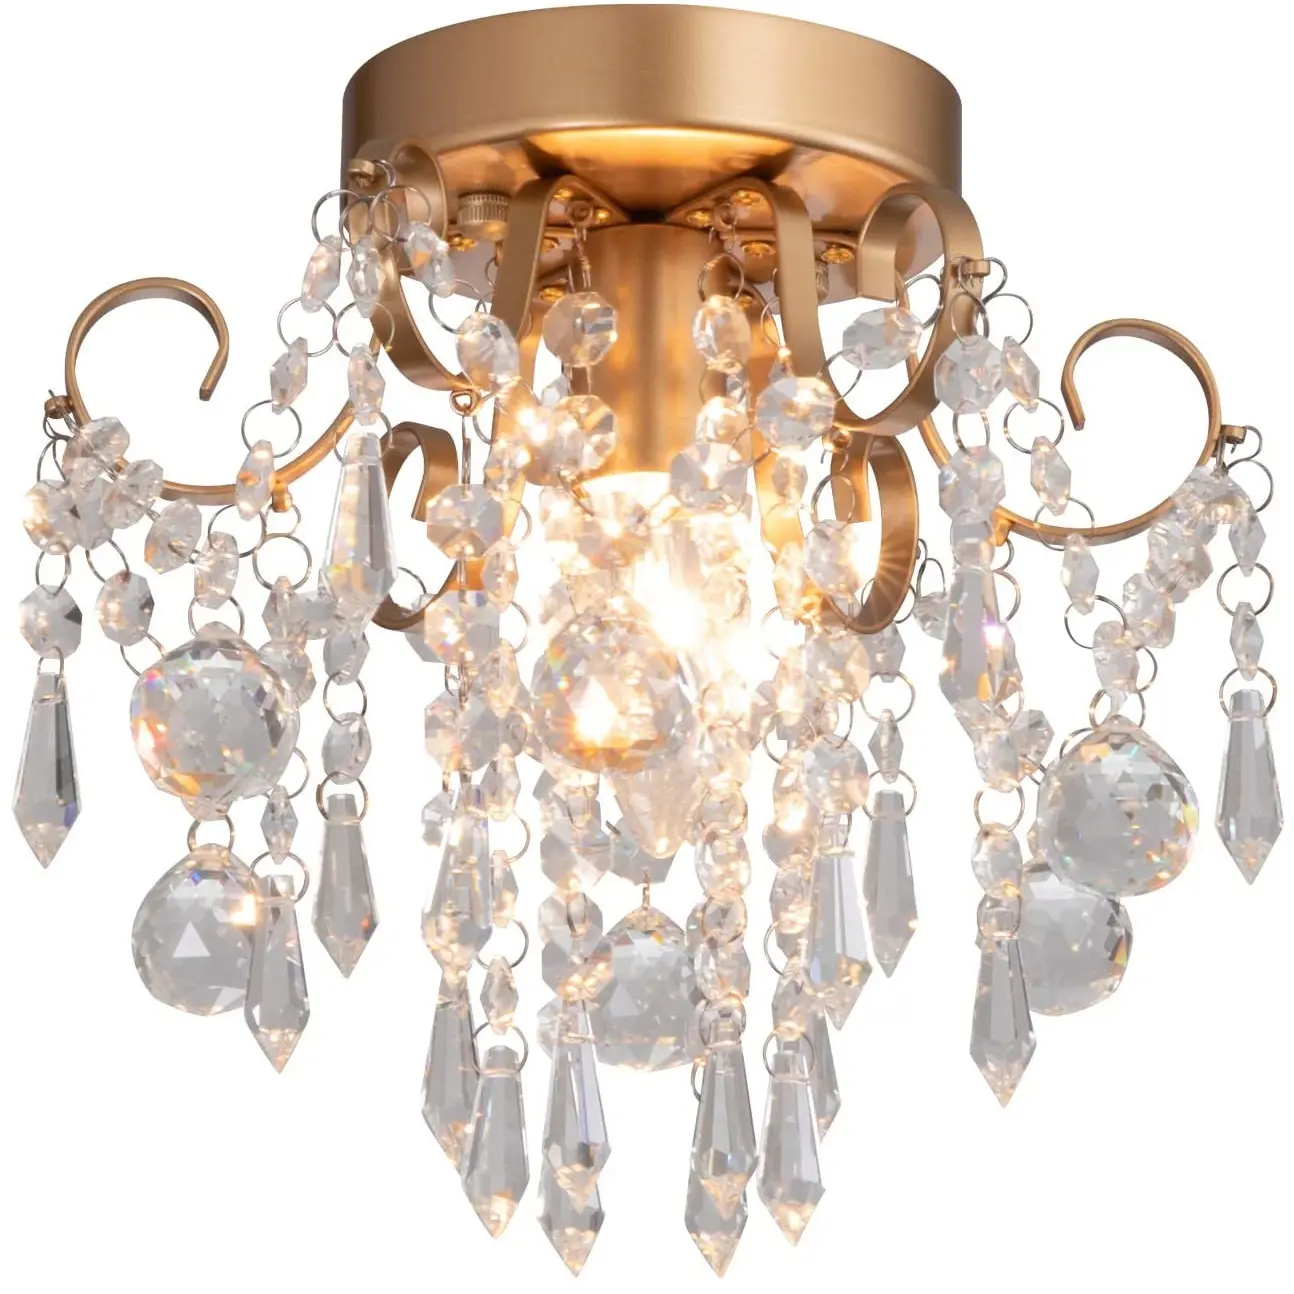 Circular Bathroom Used Chandeliers For Sale Cheap